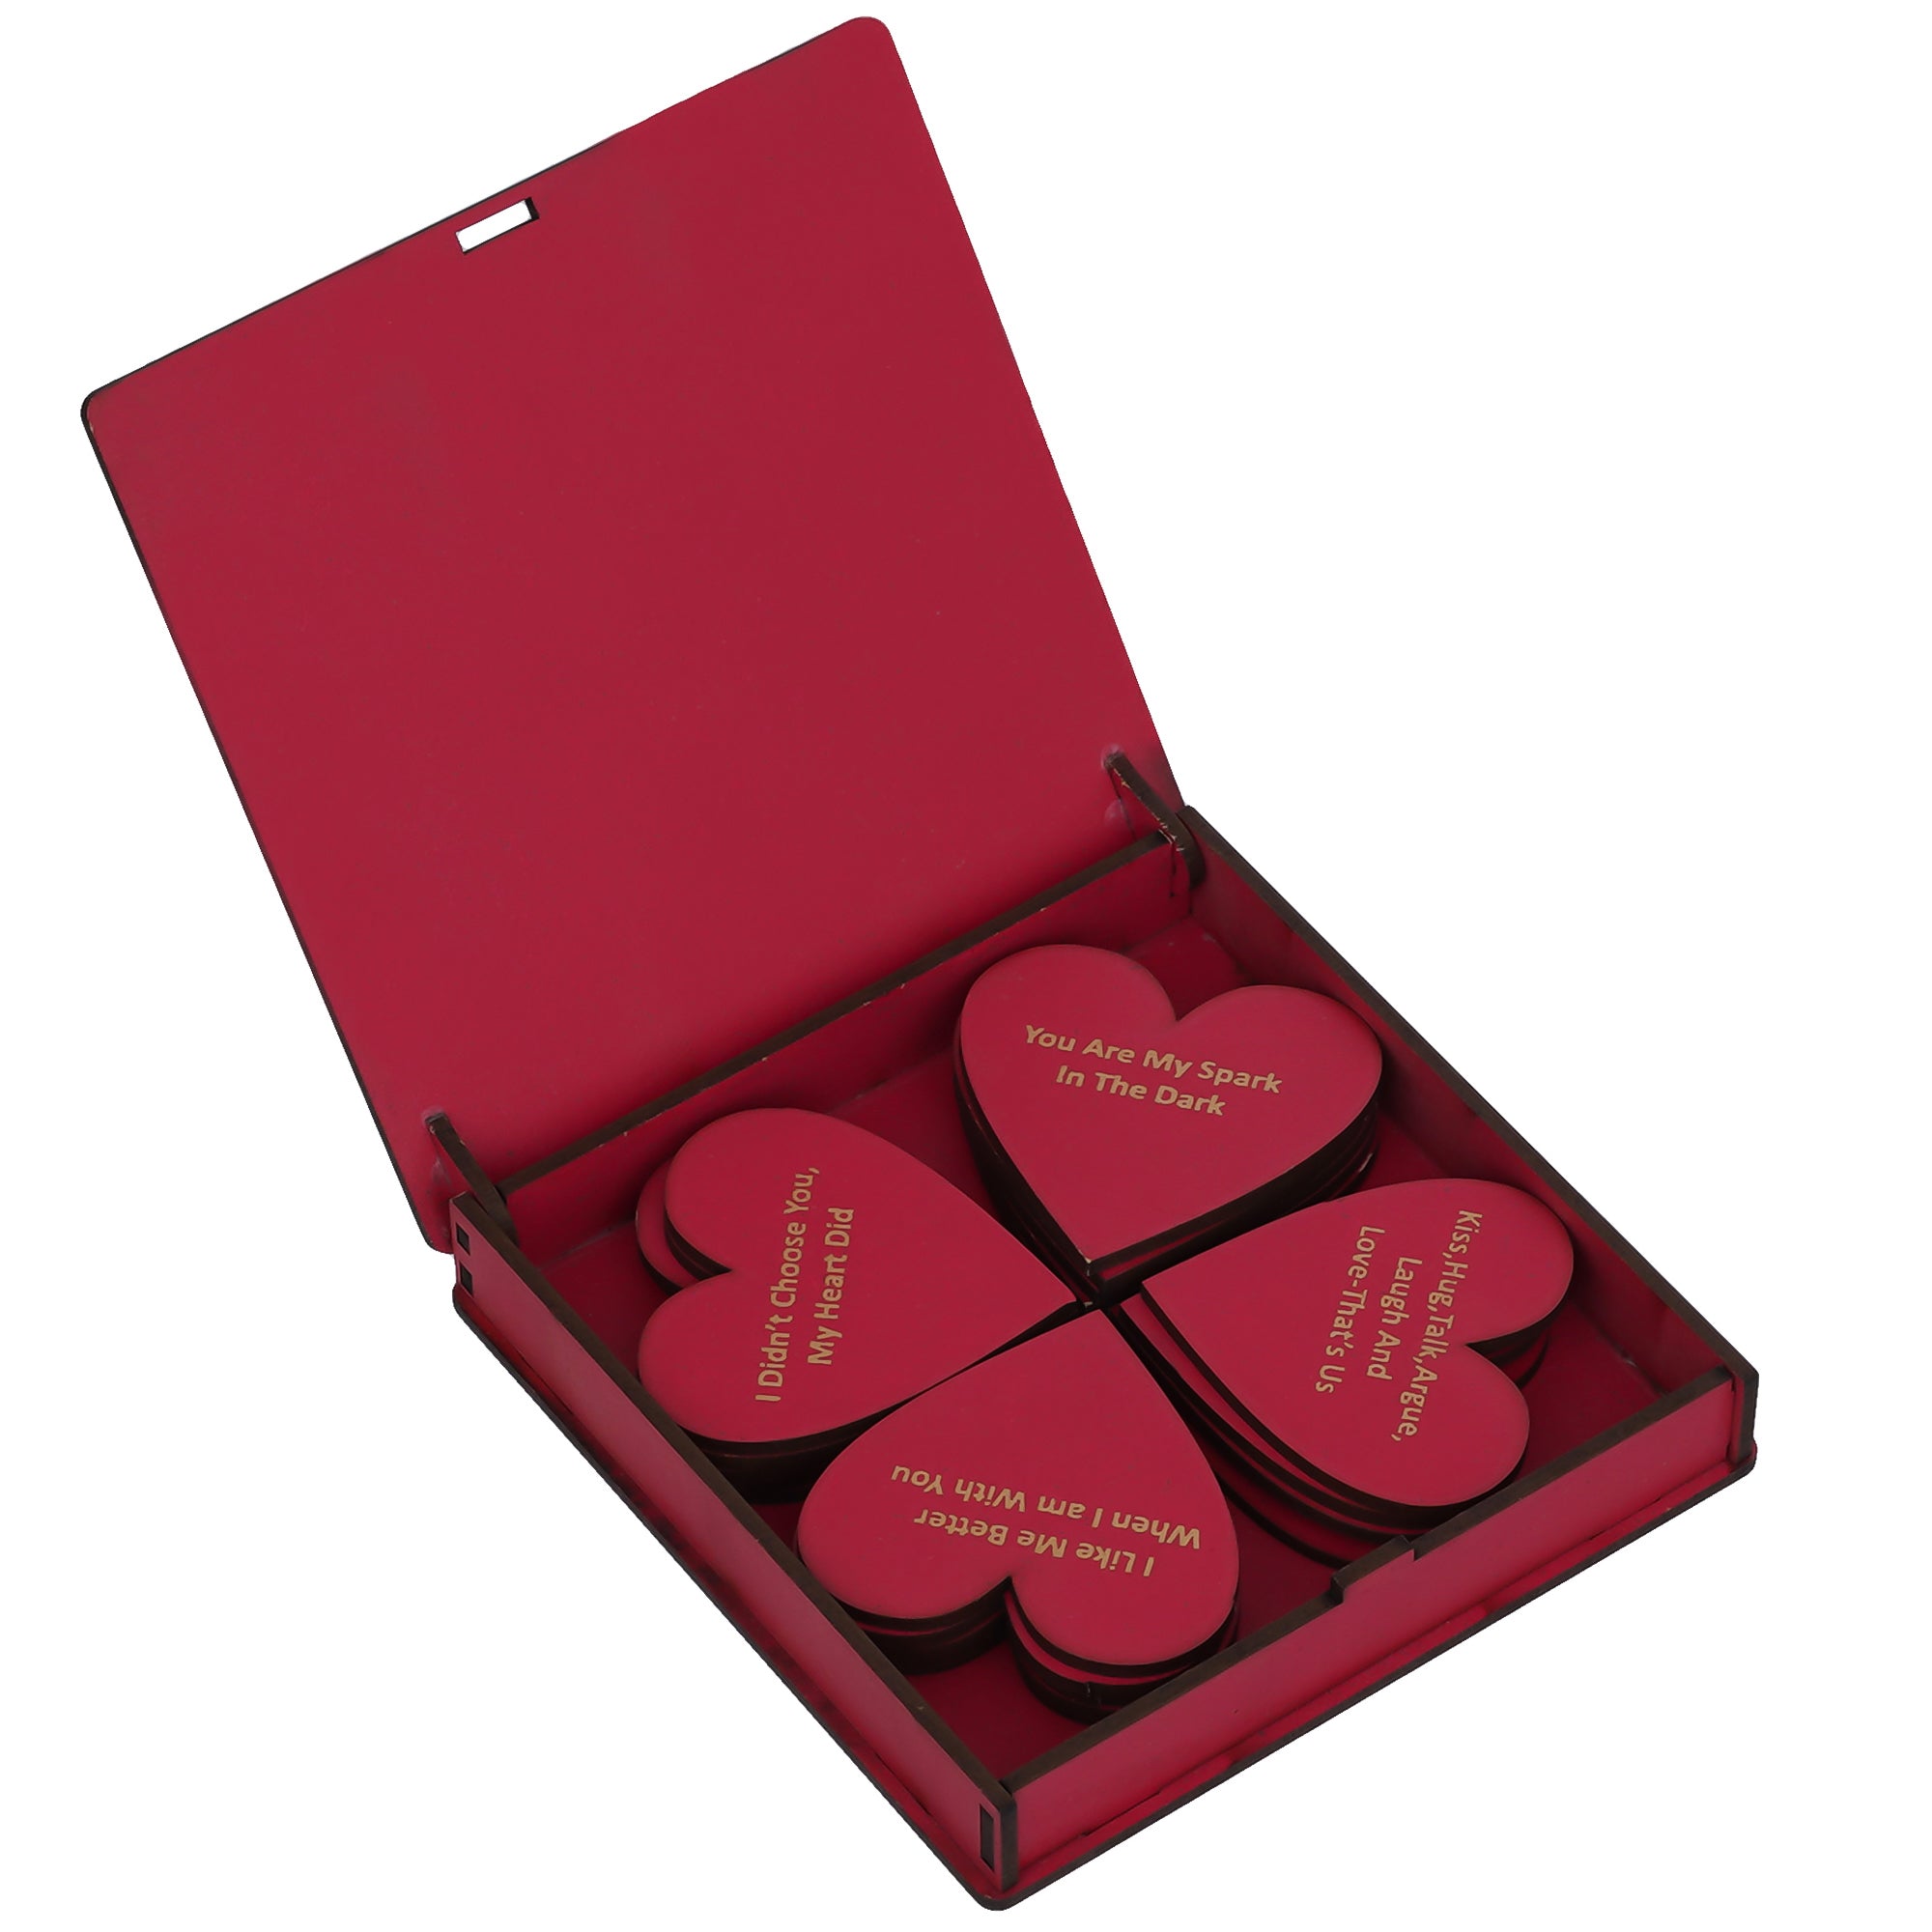 Valentine Combo of Pack of 8 Love Gift Cards, "20 Reasons Why I Love You" Printed on Little Red Hearts Decorative Wooden Gift Set Box 6